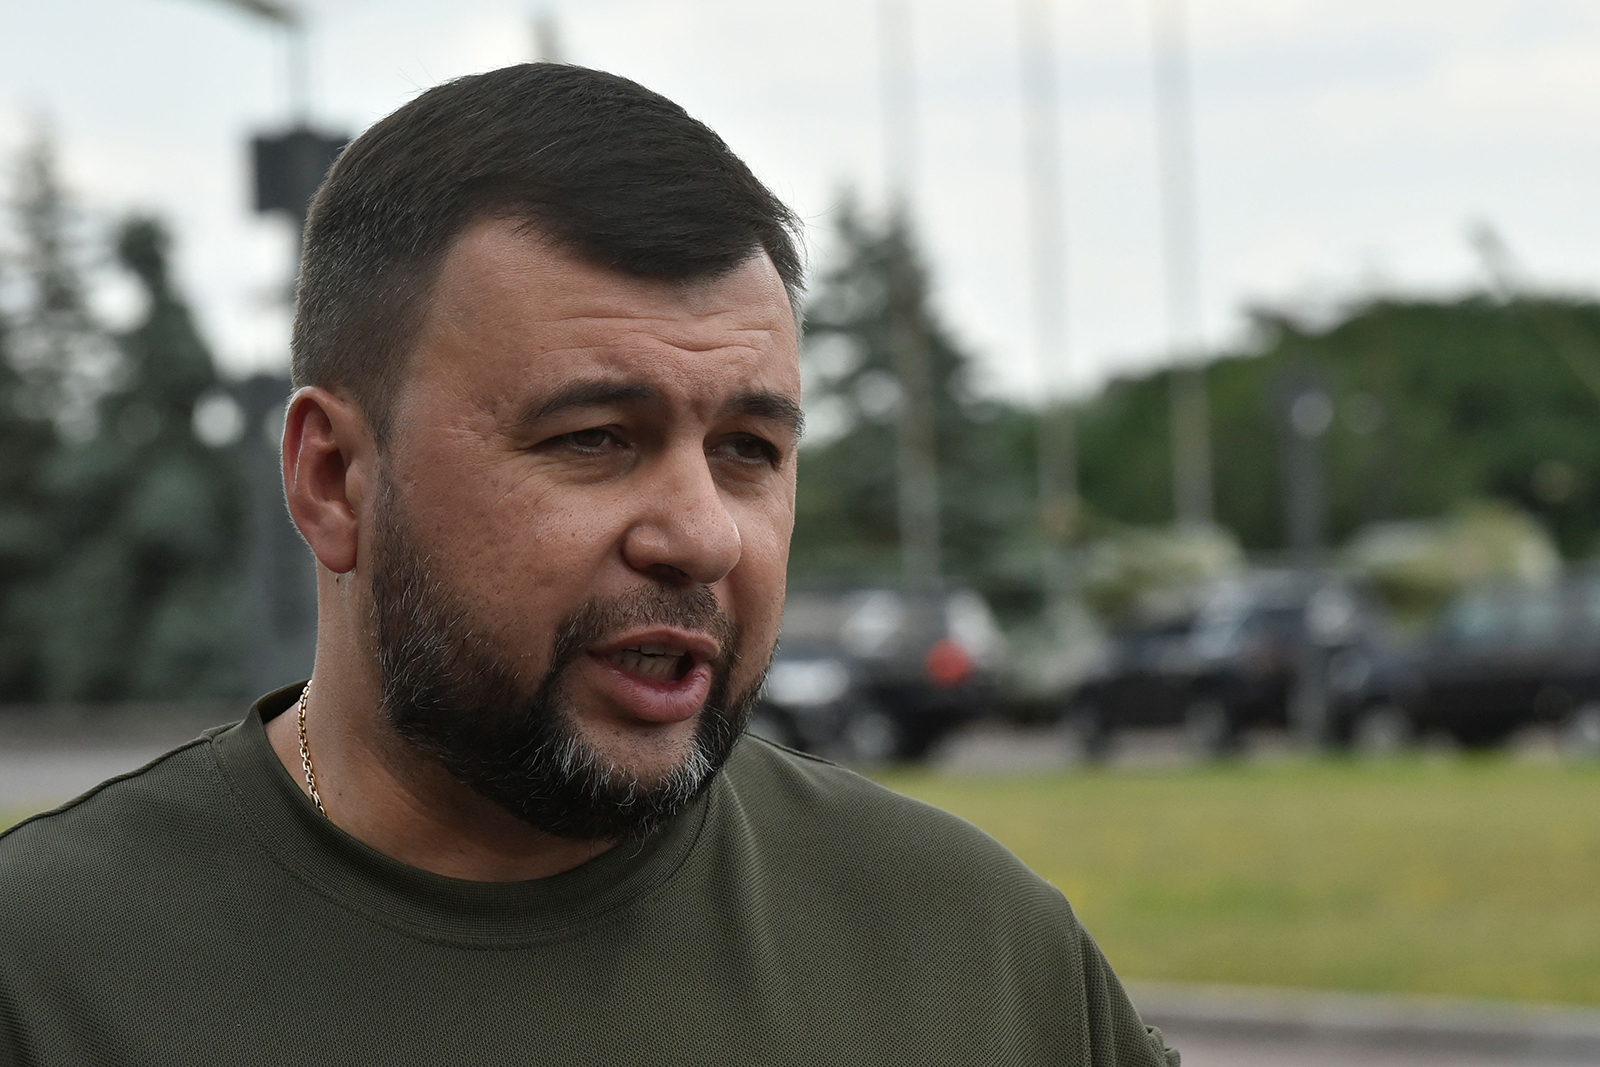 Denis Pushilin speaks to journalists in Donetsk on July 13, 2022.